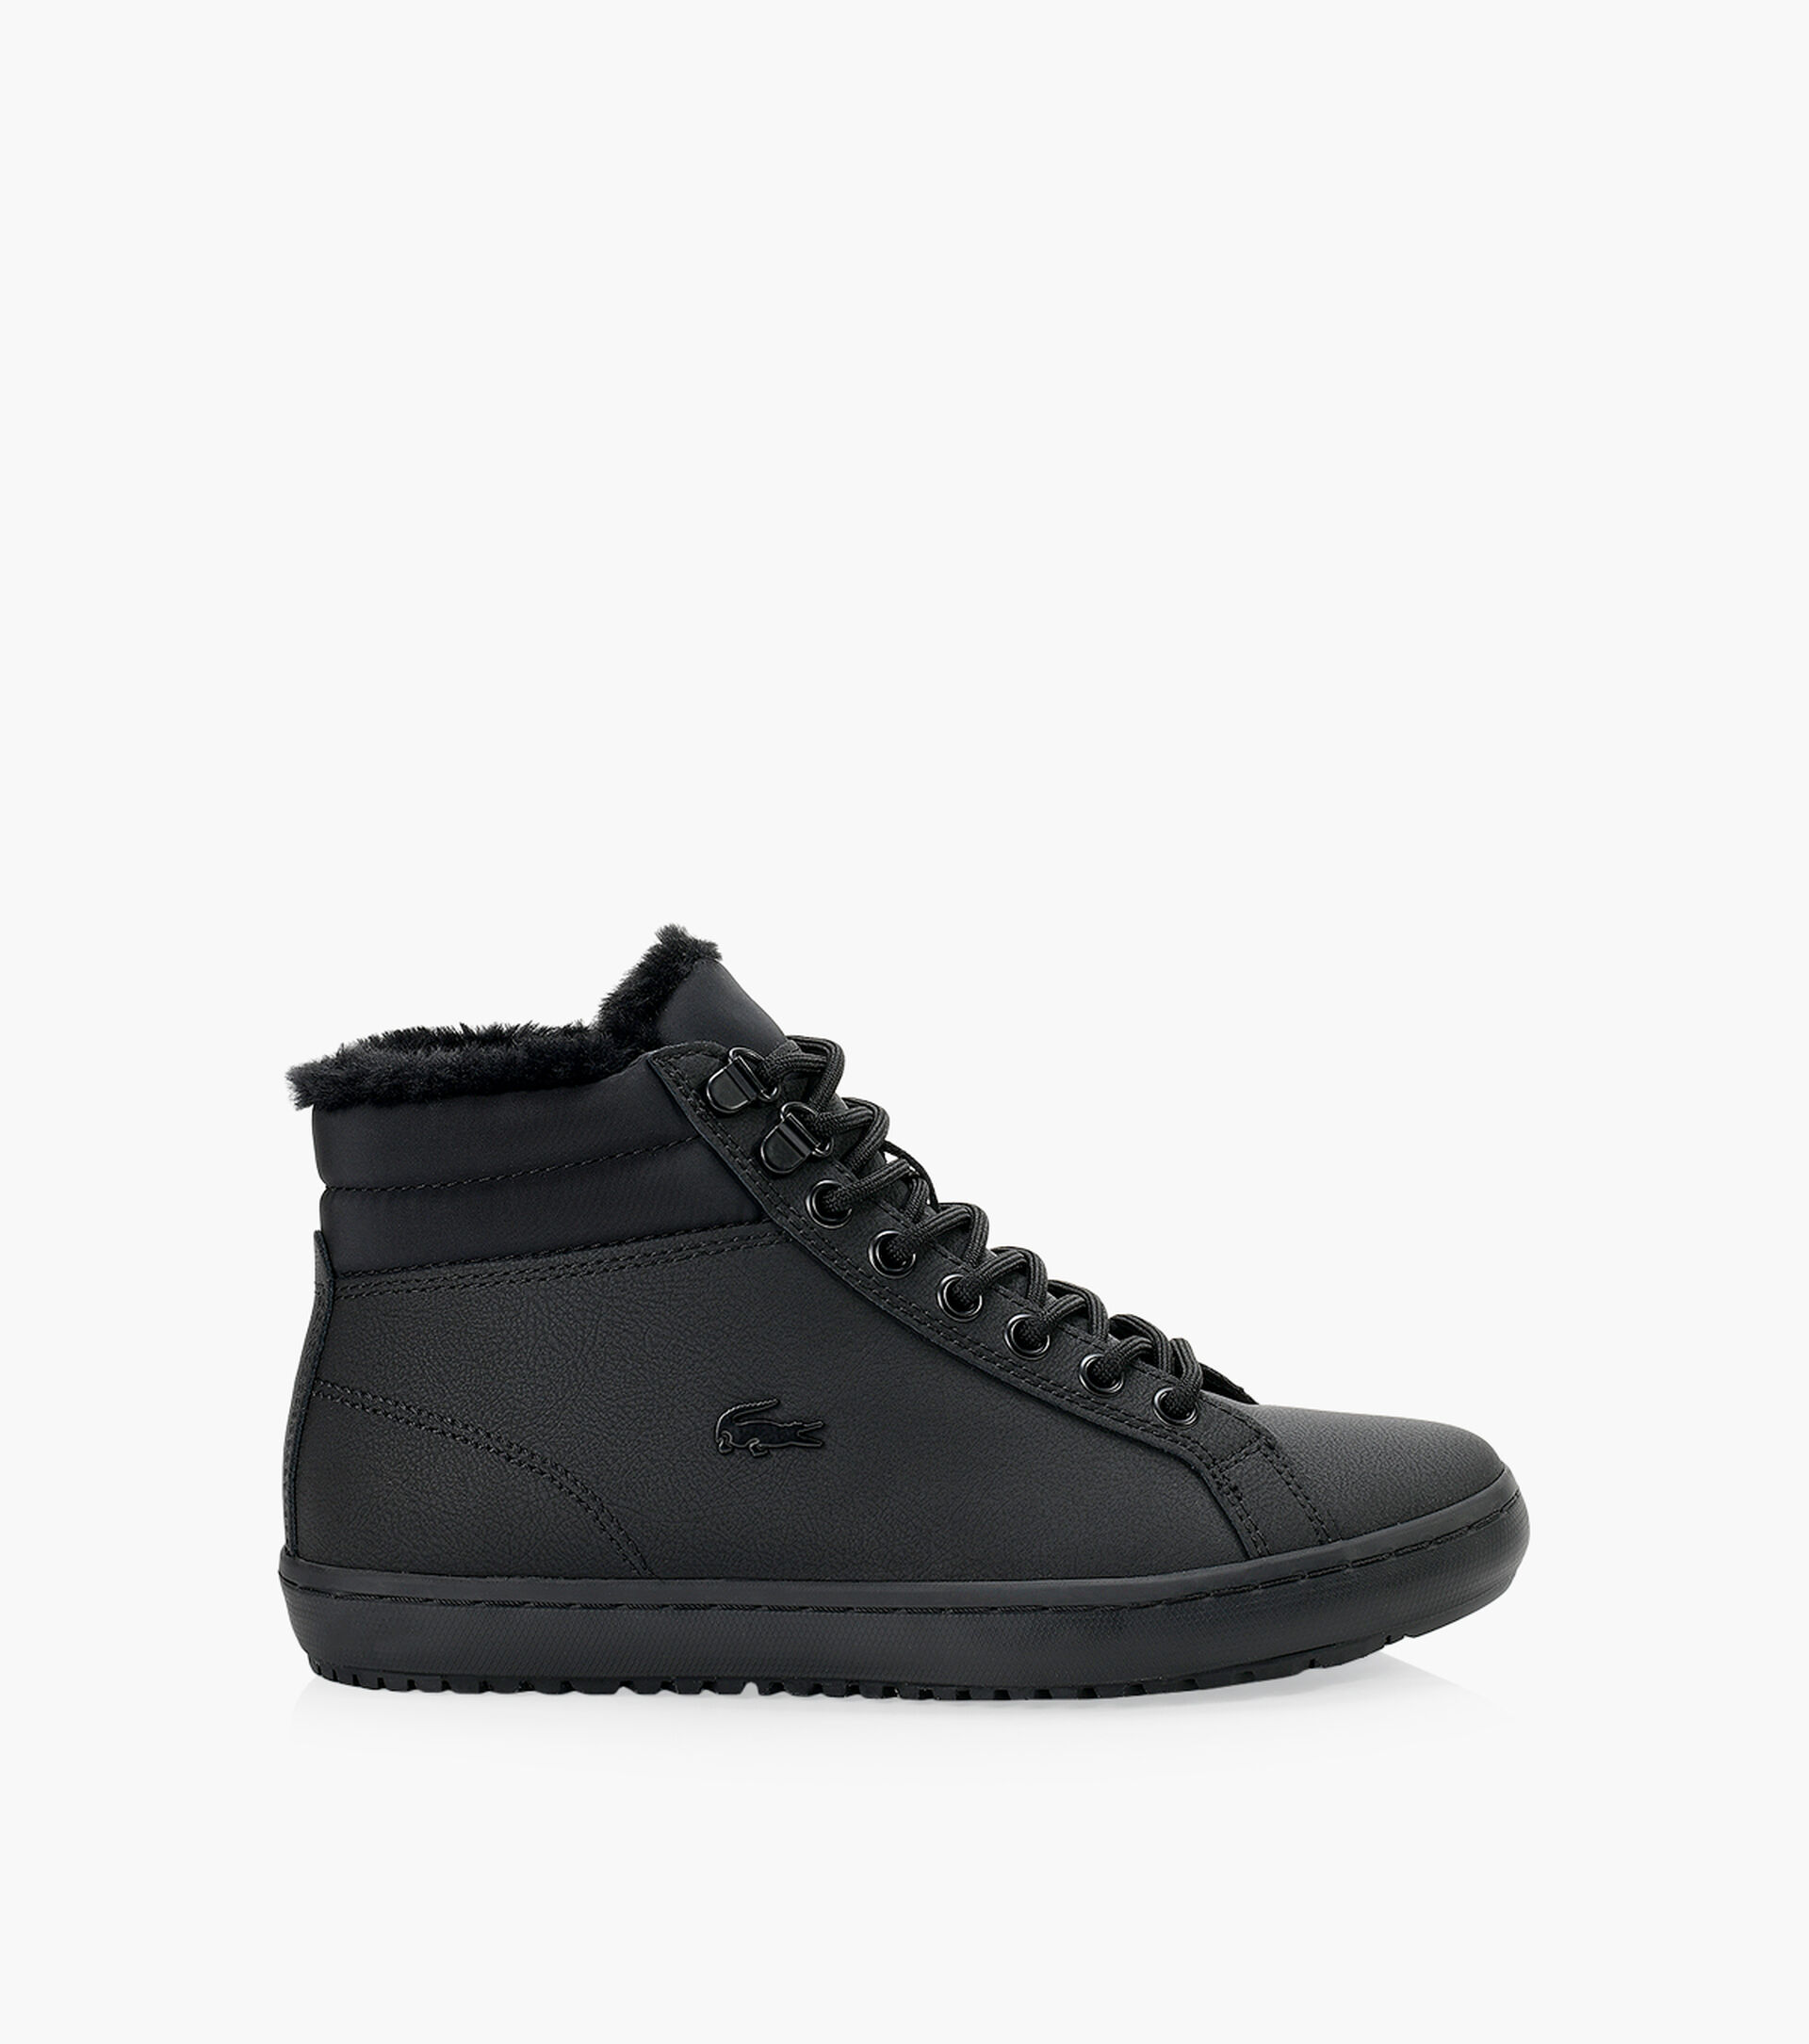 LACOSTE THERMO 419 1 - Black | Browns